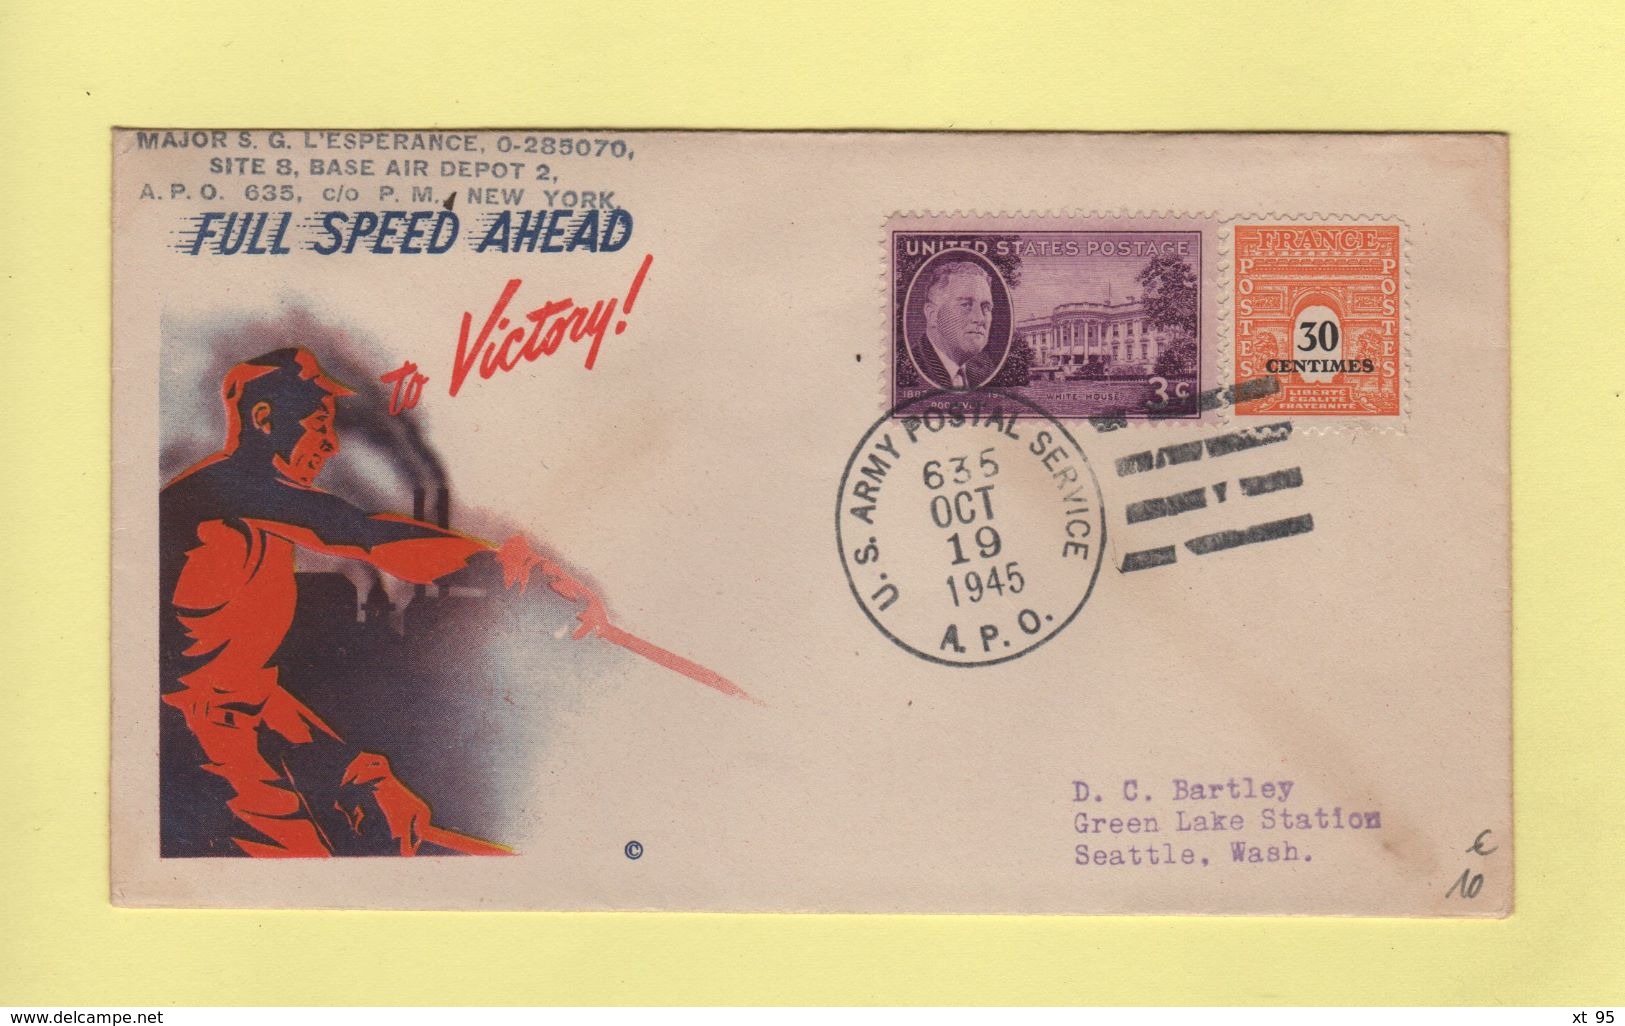 APO 635 - US Postal Army Service - 19 Oct 1945 - Mixte US France - Full Speed Ahead For Victory - Guerra De 1939-45